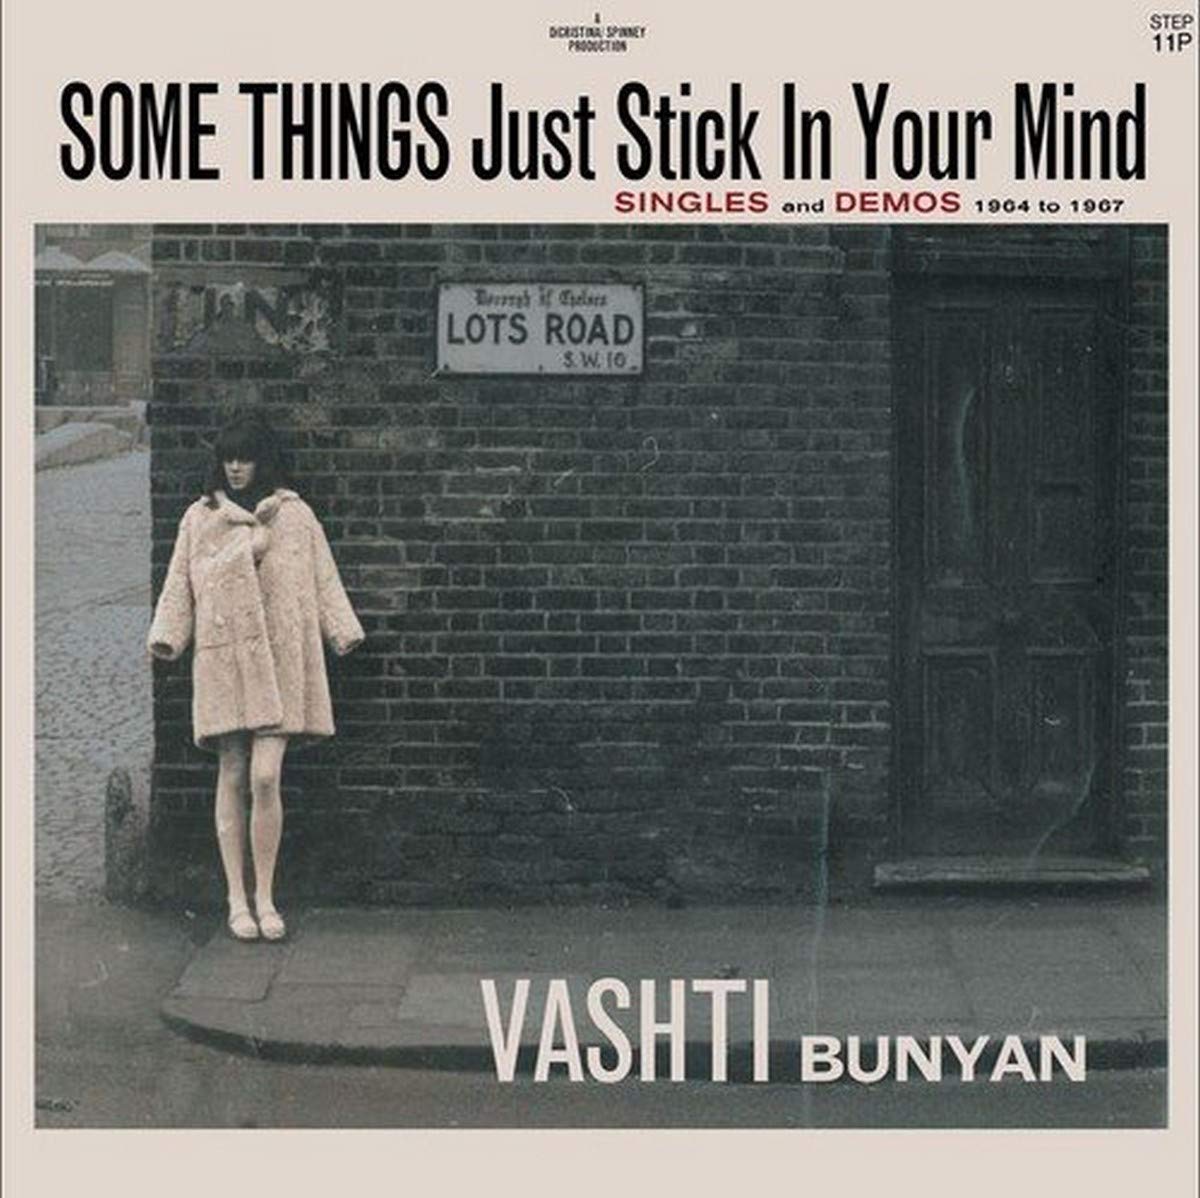 VASHTI BUNYAN - SOME THINGS JUST STICK IN YOUR MIND - LP